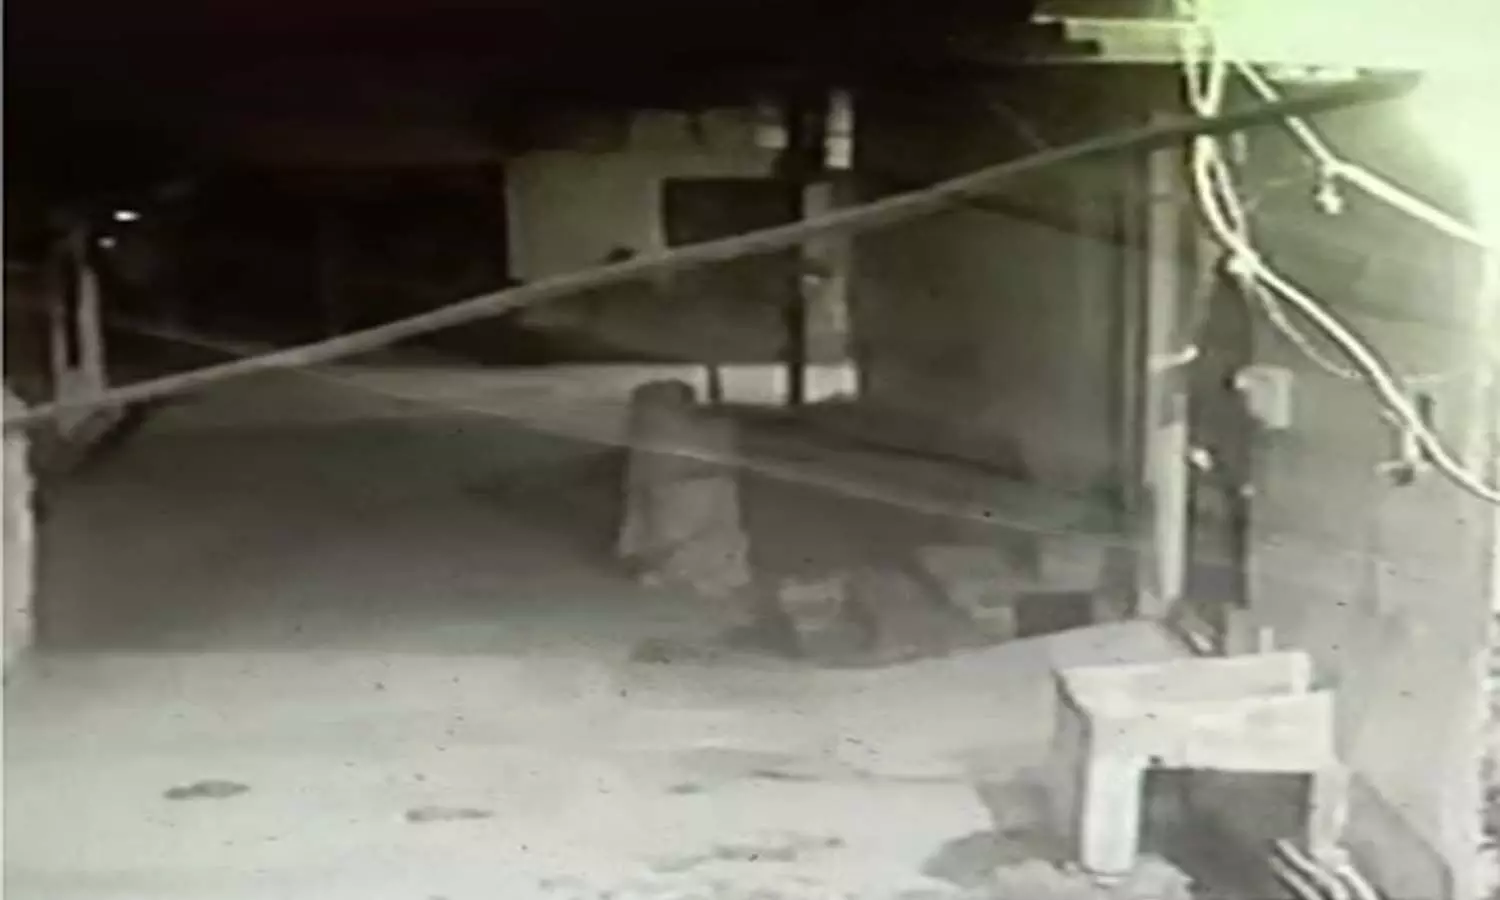 The truth of the ghost video in Aligarh, the woman said - the video was viral to defame